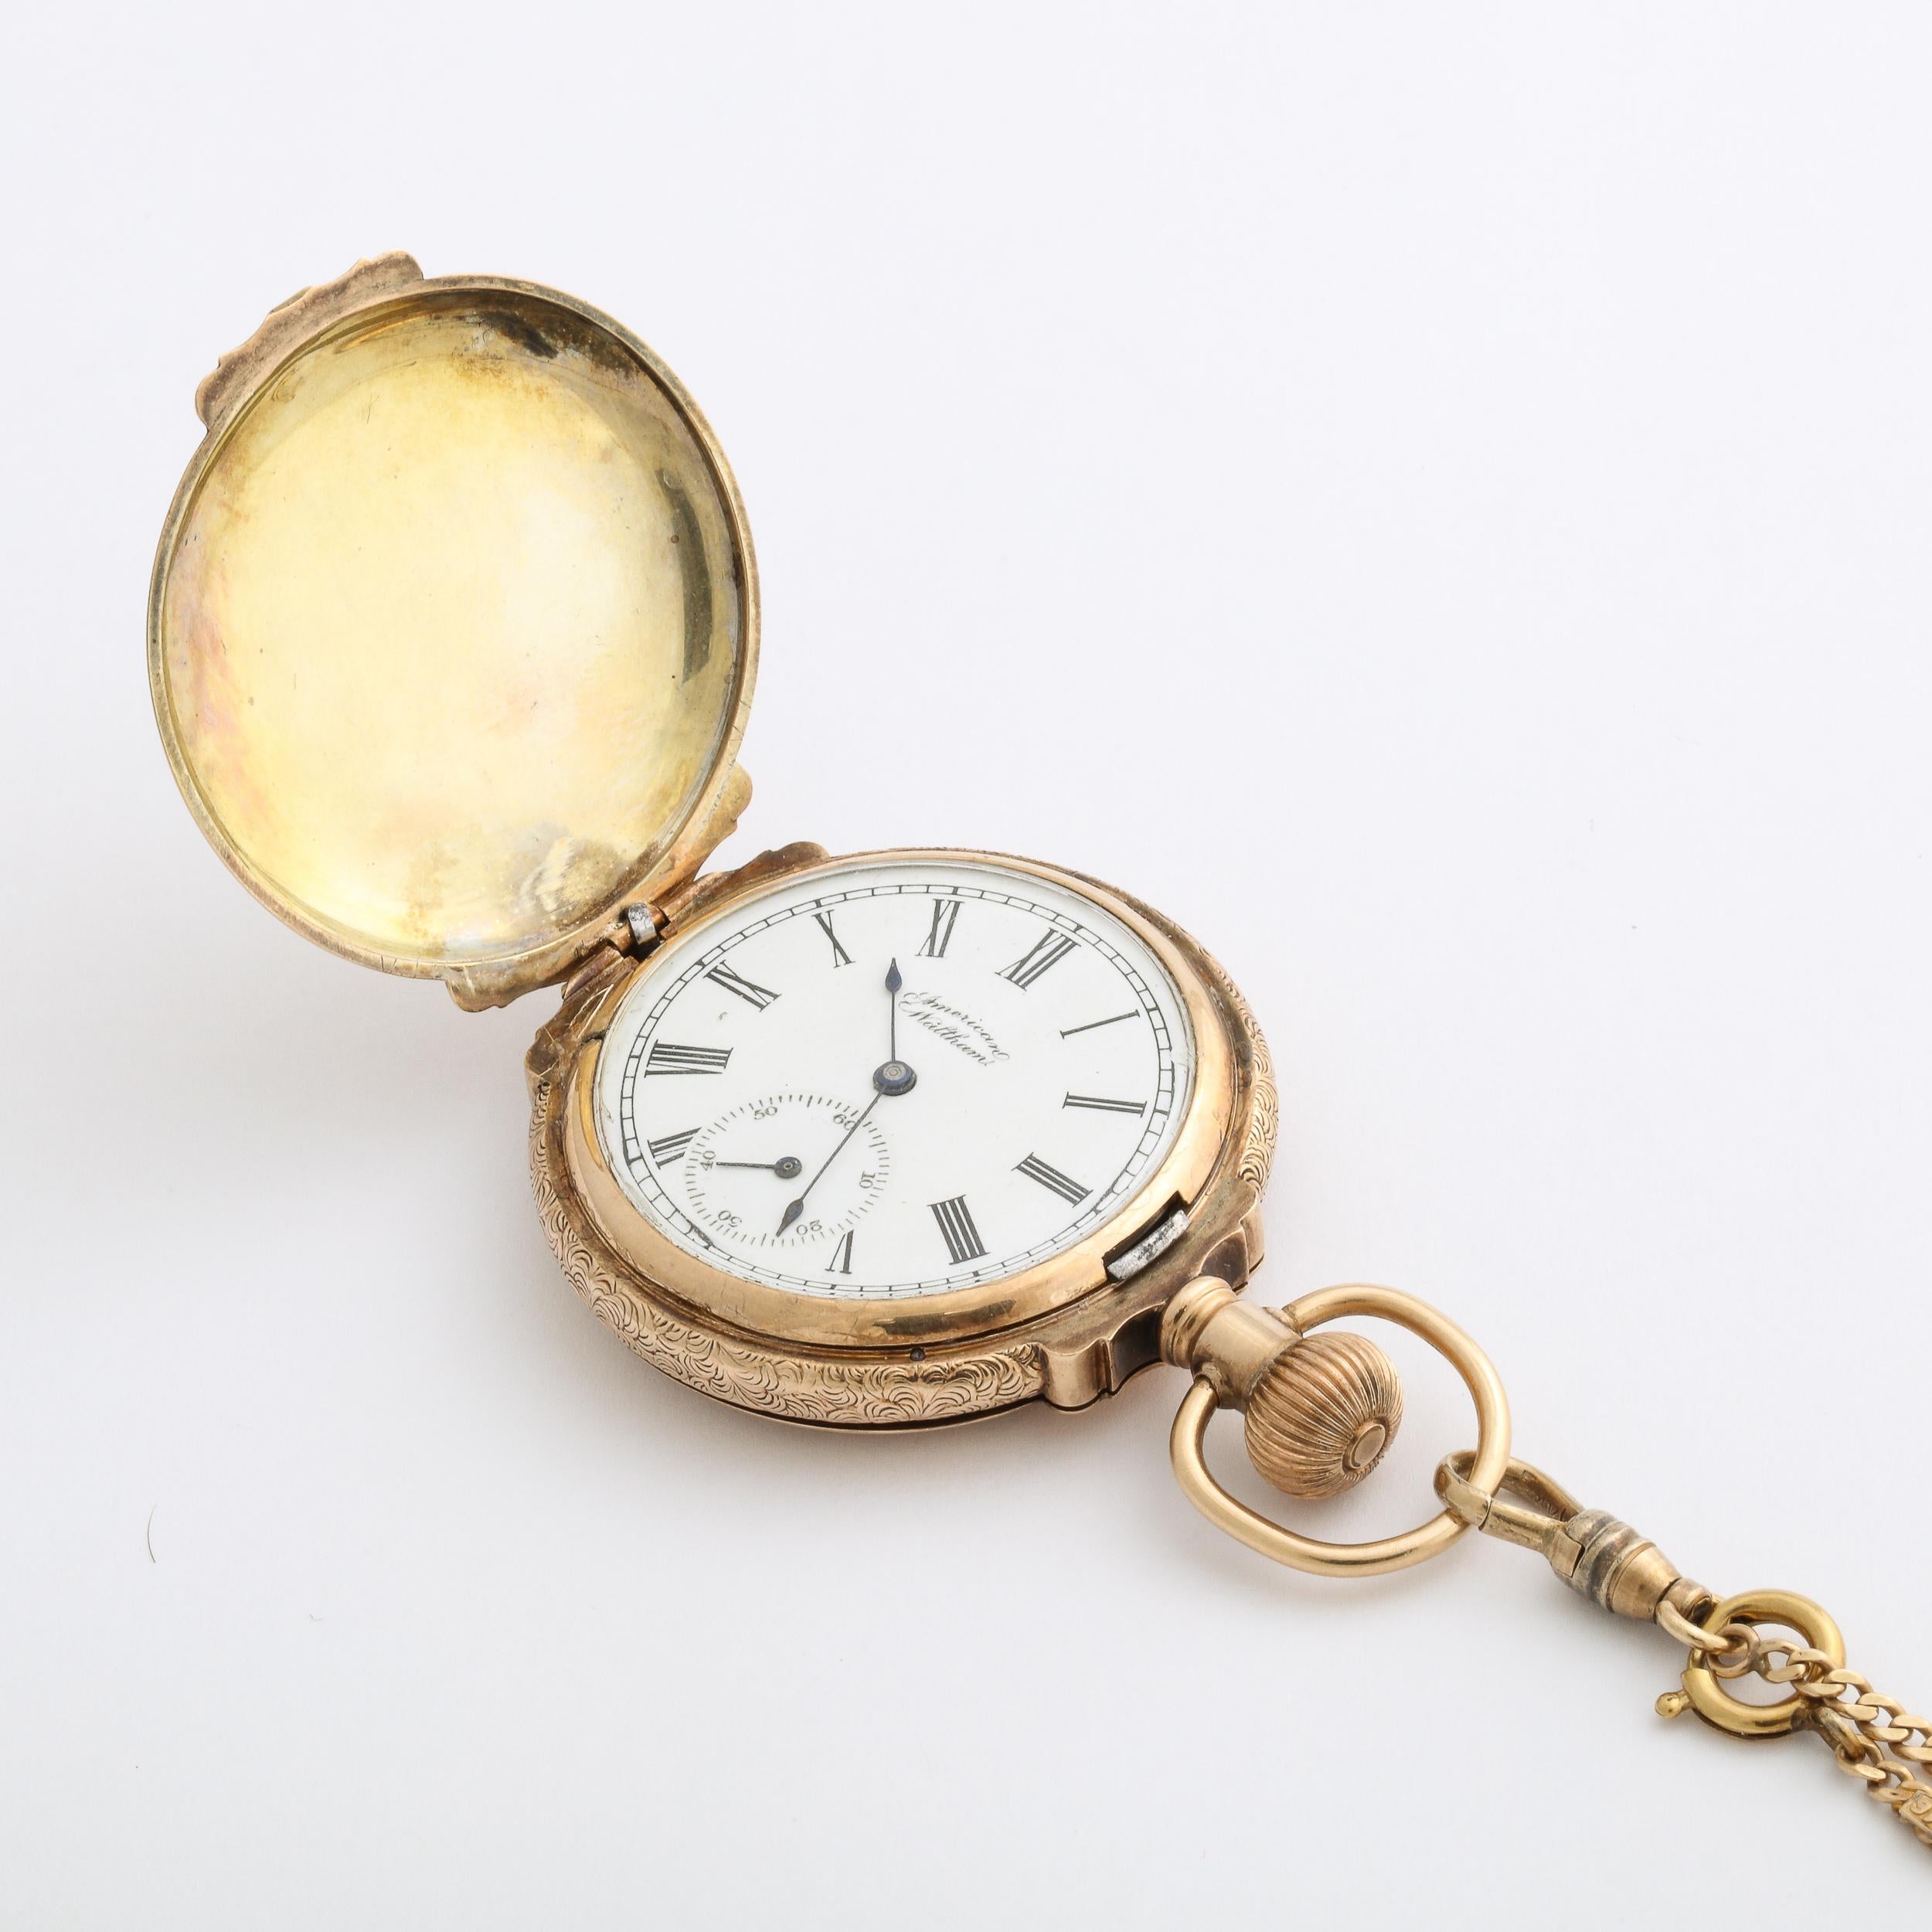 Antique 14K Yellow Gold Lady's Hunting Watch W/ Chain  by Waltham Watch Co. 1888 For Sale 9